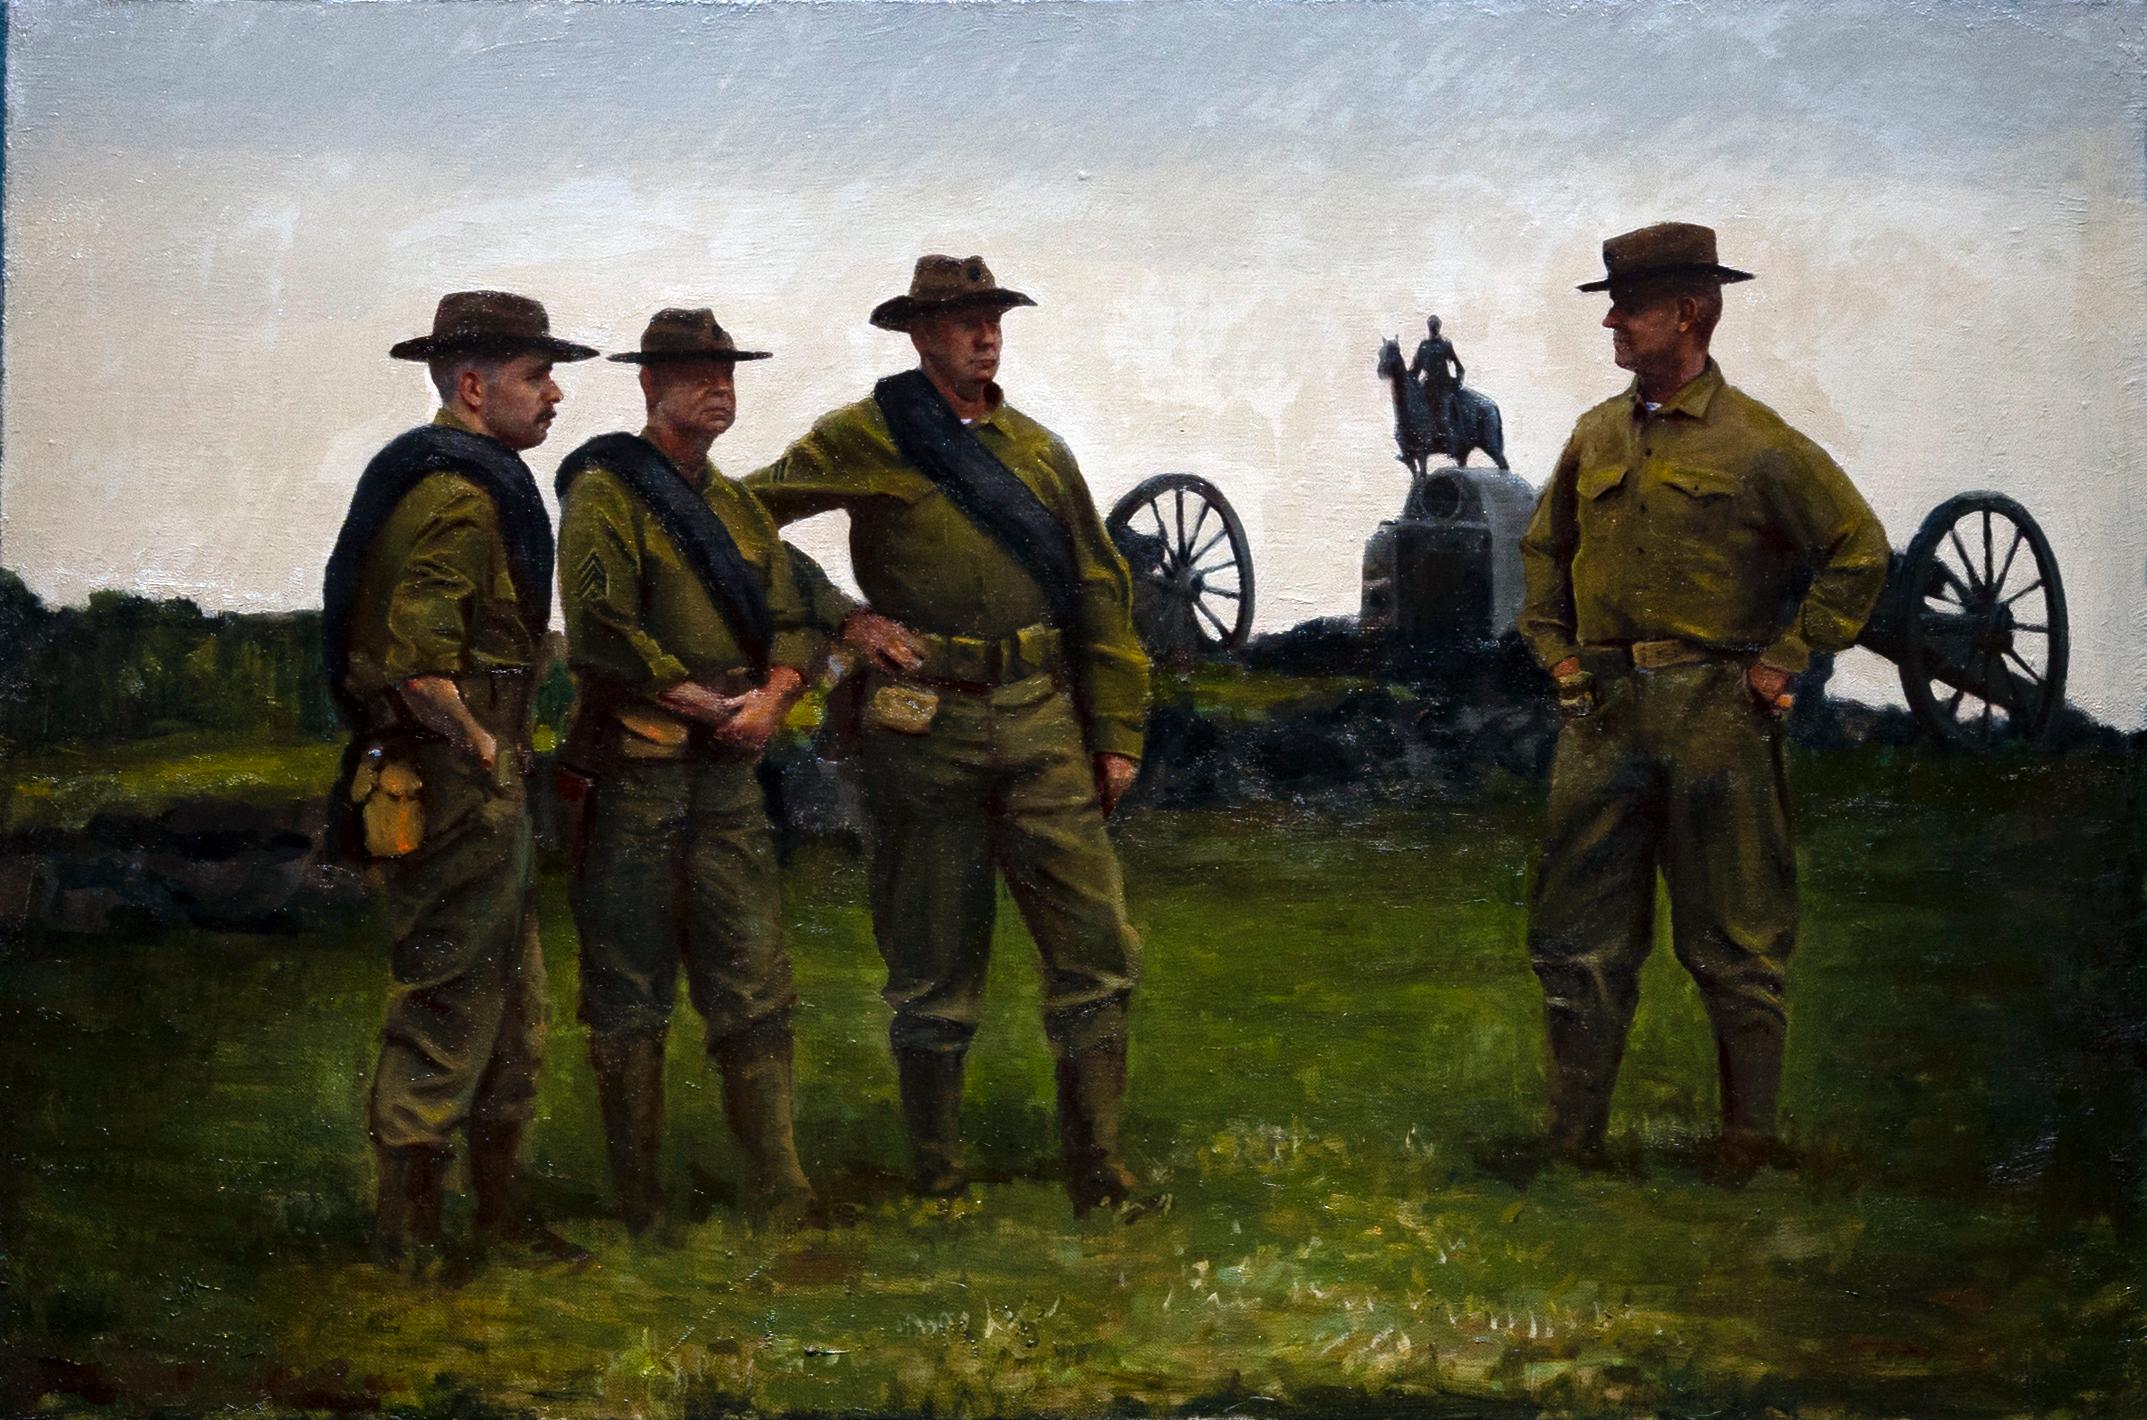 Union - A Group of Uniformed Soldiers Standing in an Open Field, Oil on Linen